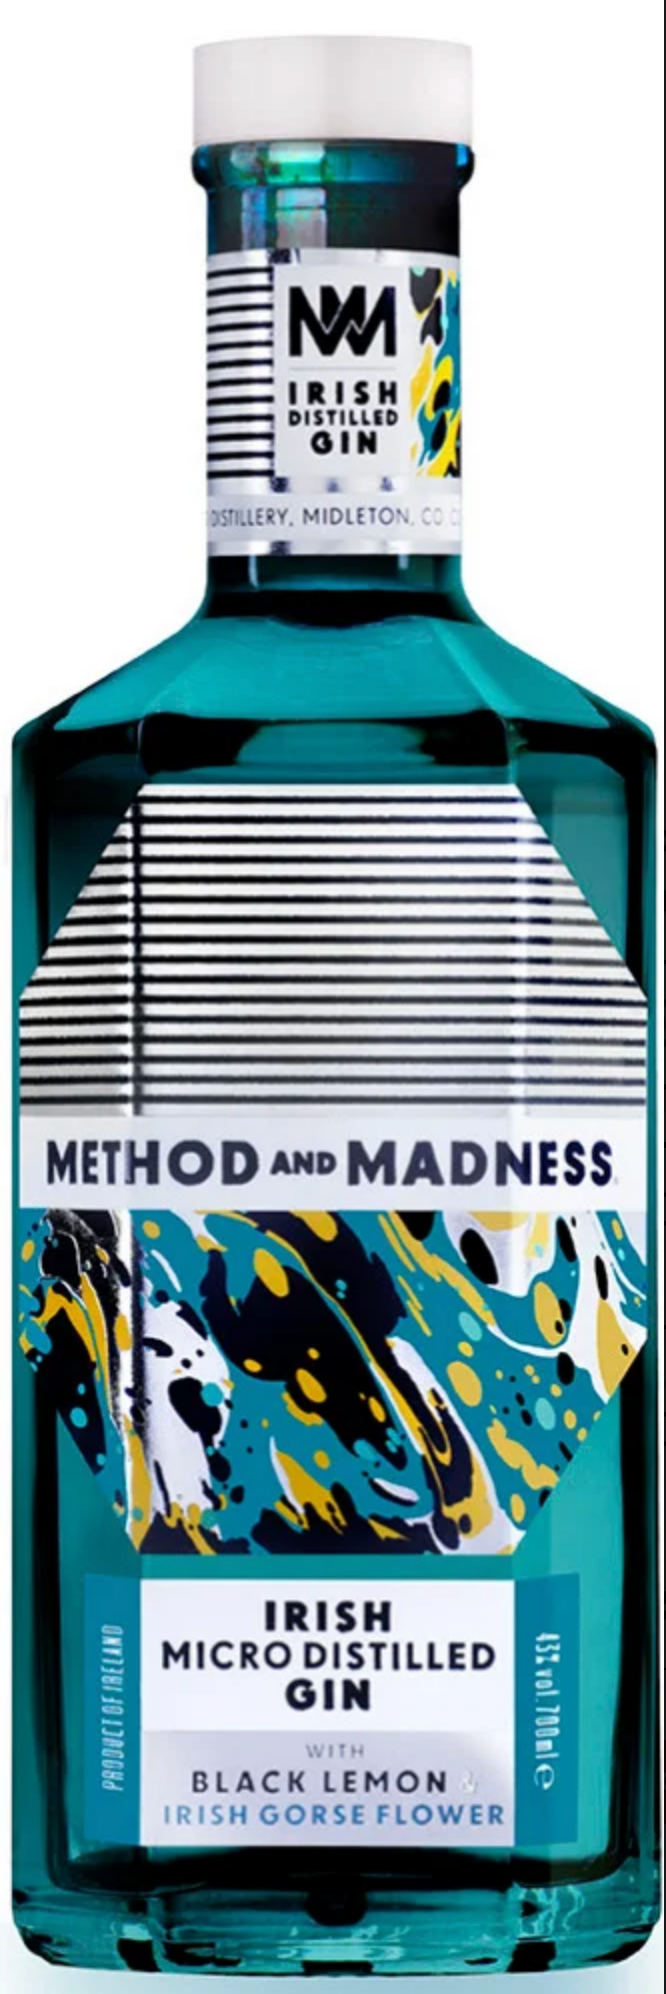 Method and Madness Micro Distilled Gin